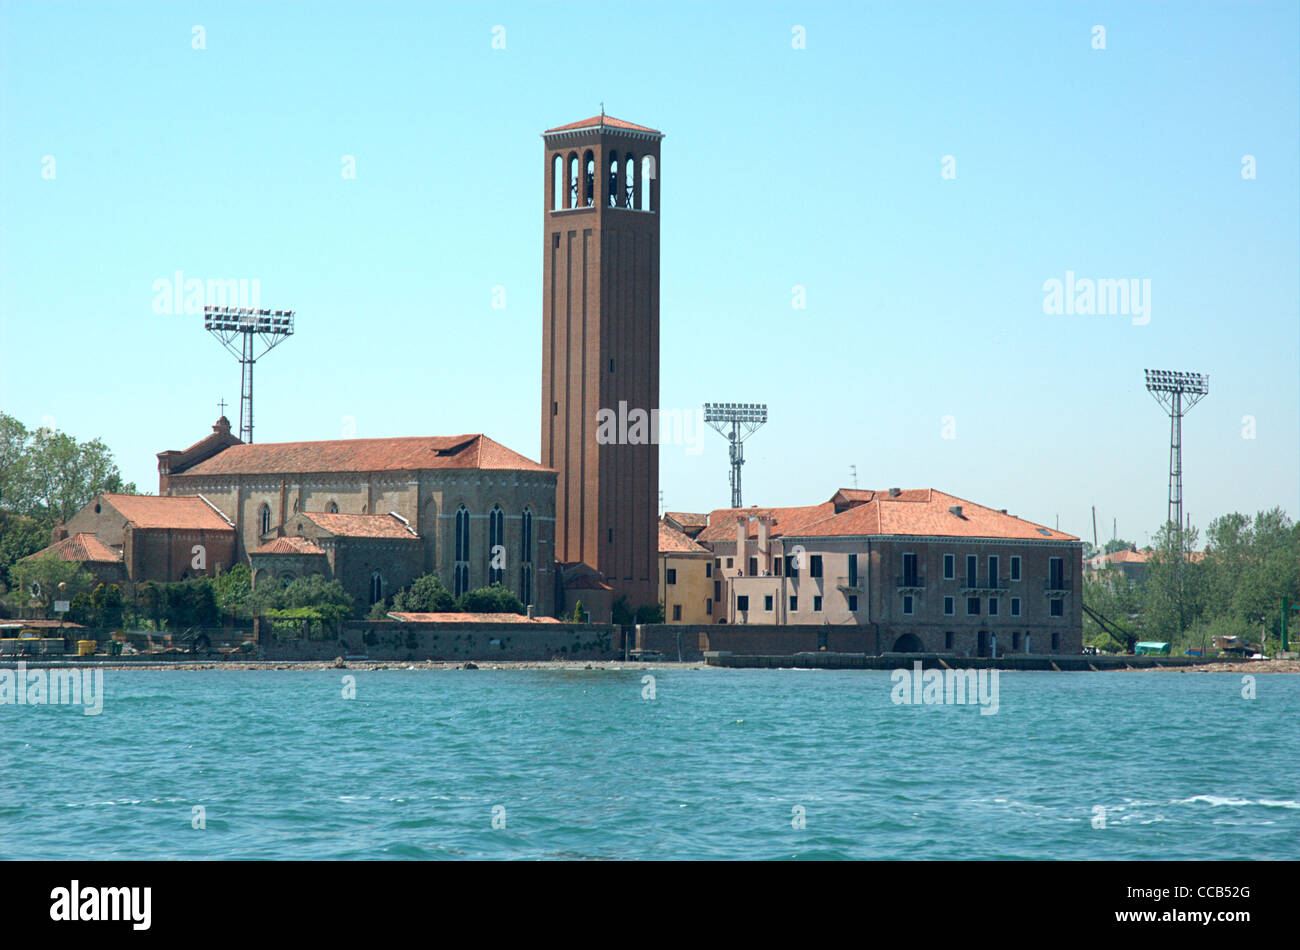 Chiesa di Sant'Elena Venezia or Church of Sant'Elena, Venice, with the floodlights of the football stadium in the background. Stock Photo